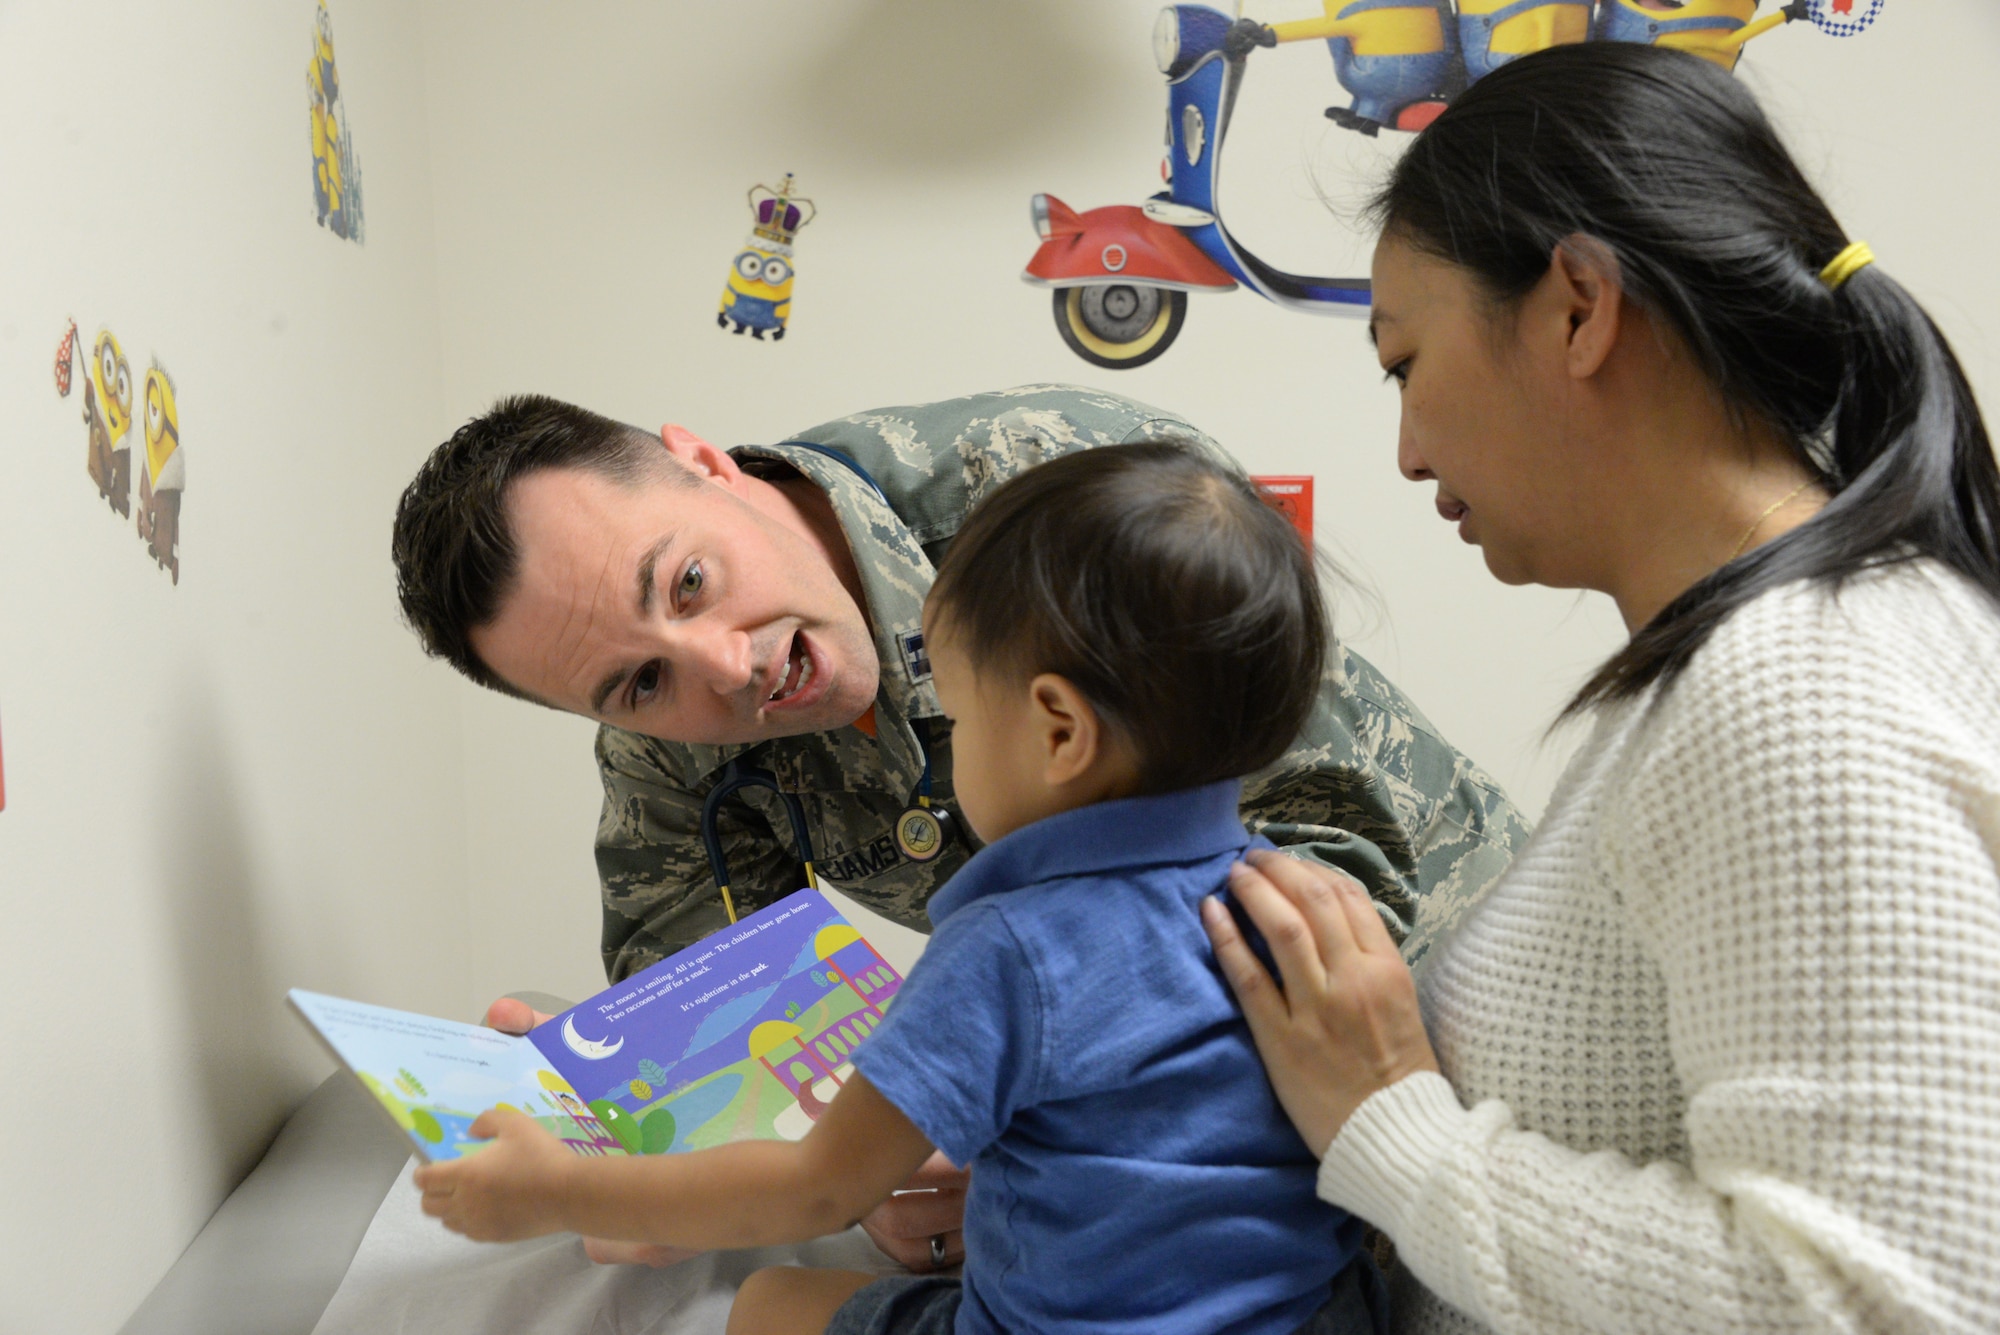 Levi, center, is held by his mother, Jolene Abaya, during a check-up March 30, 2018, with Capt. (Dr.) Steven Williams, 60th Medical Operations Squadron staff pediatrician, at the David Grant USAF Medical Center Pediatric Clinic at Travis Air Force Base, Calif. The Pediatric Clinic cares for 4,500 military children between the ages of newborn to 18 years old. (U.S. Air Force photo by Staff Sgt. Amber Carter).